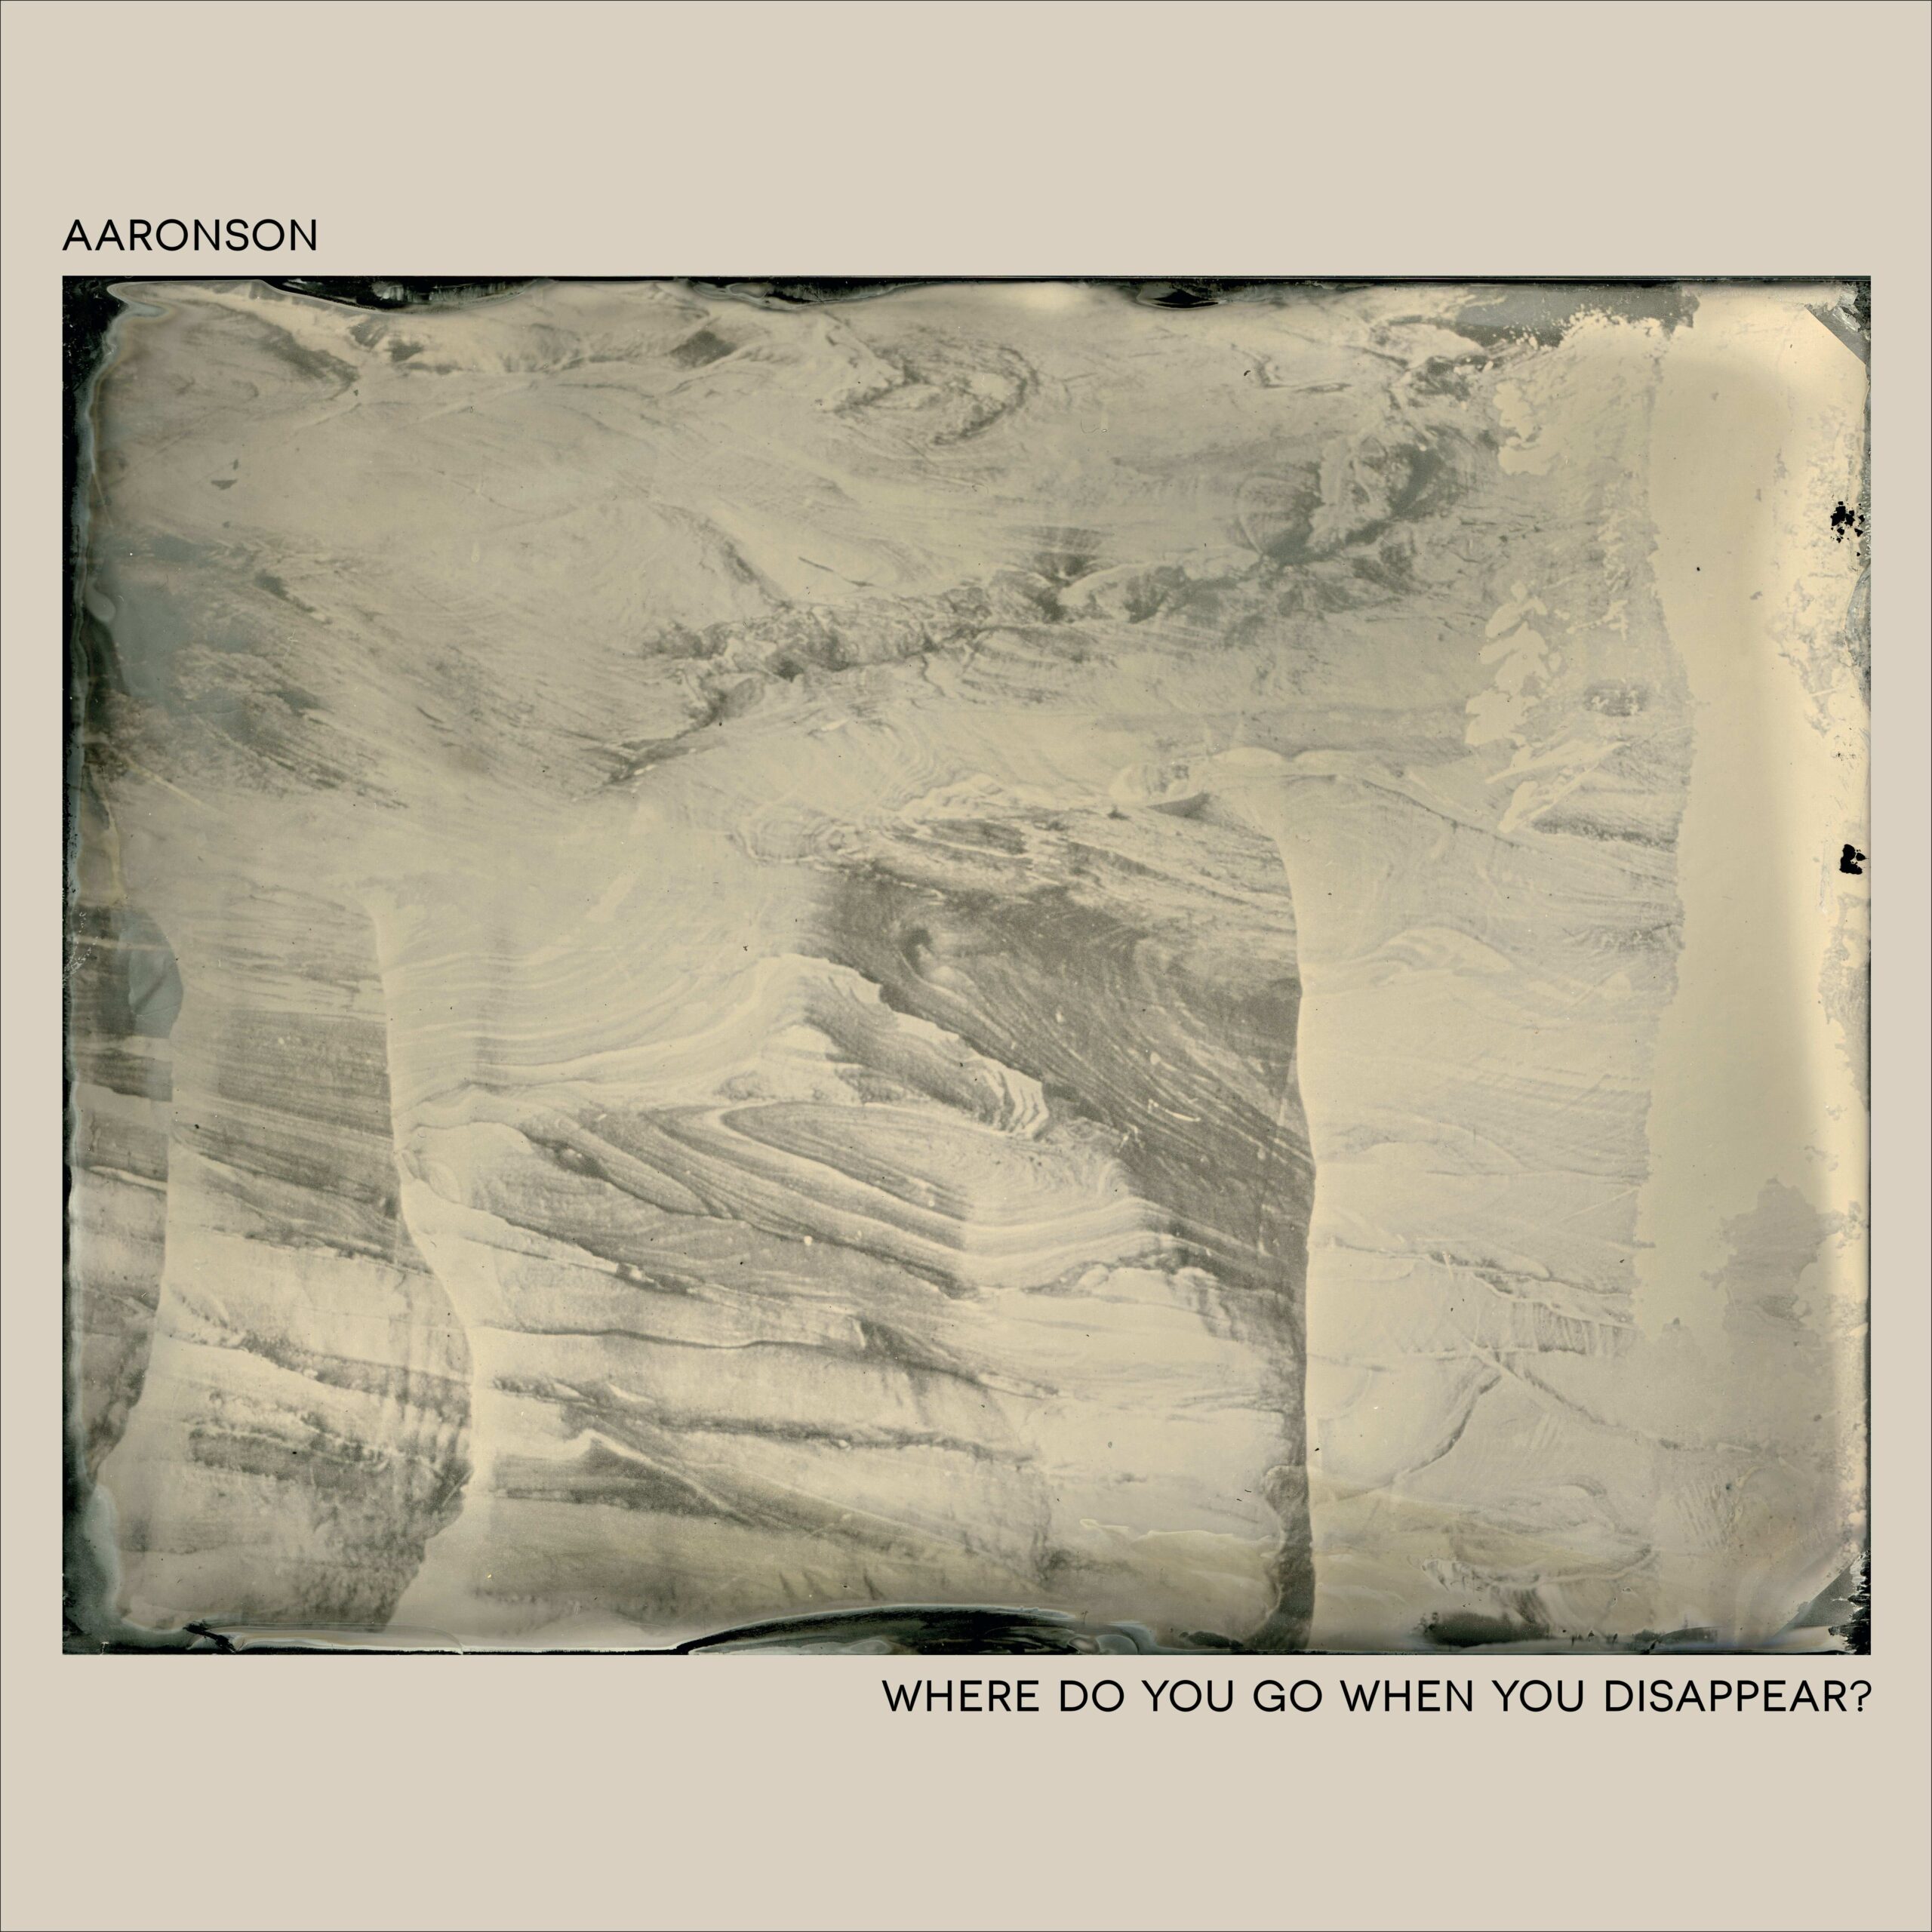 HOT TRACK: “Where Do You Go When You Disappear?” by Aaronson